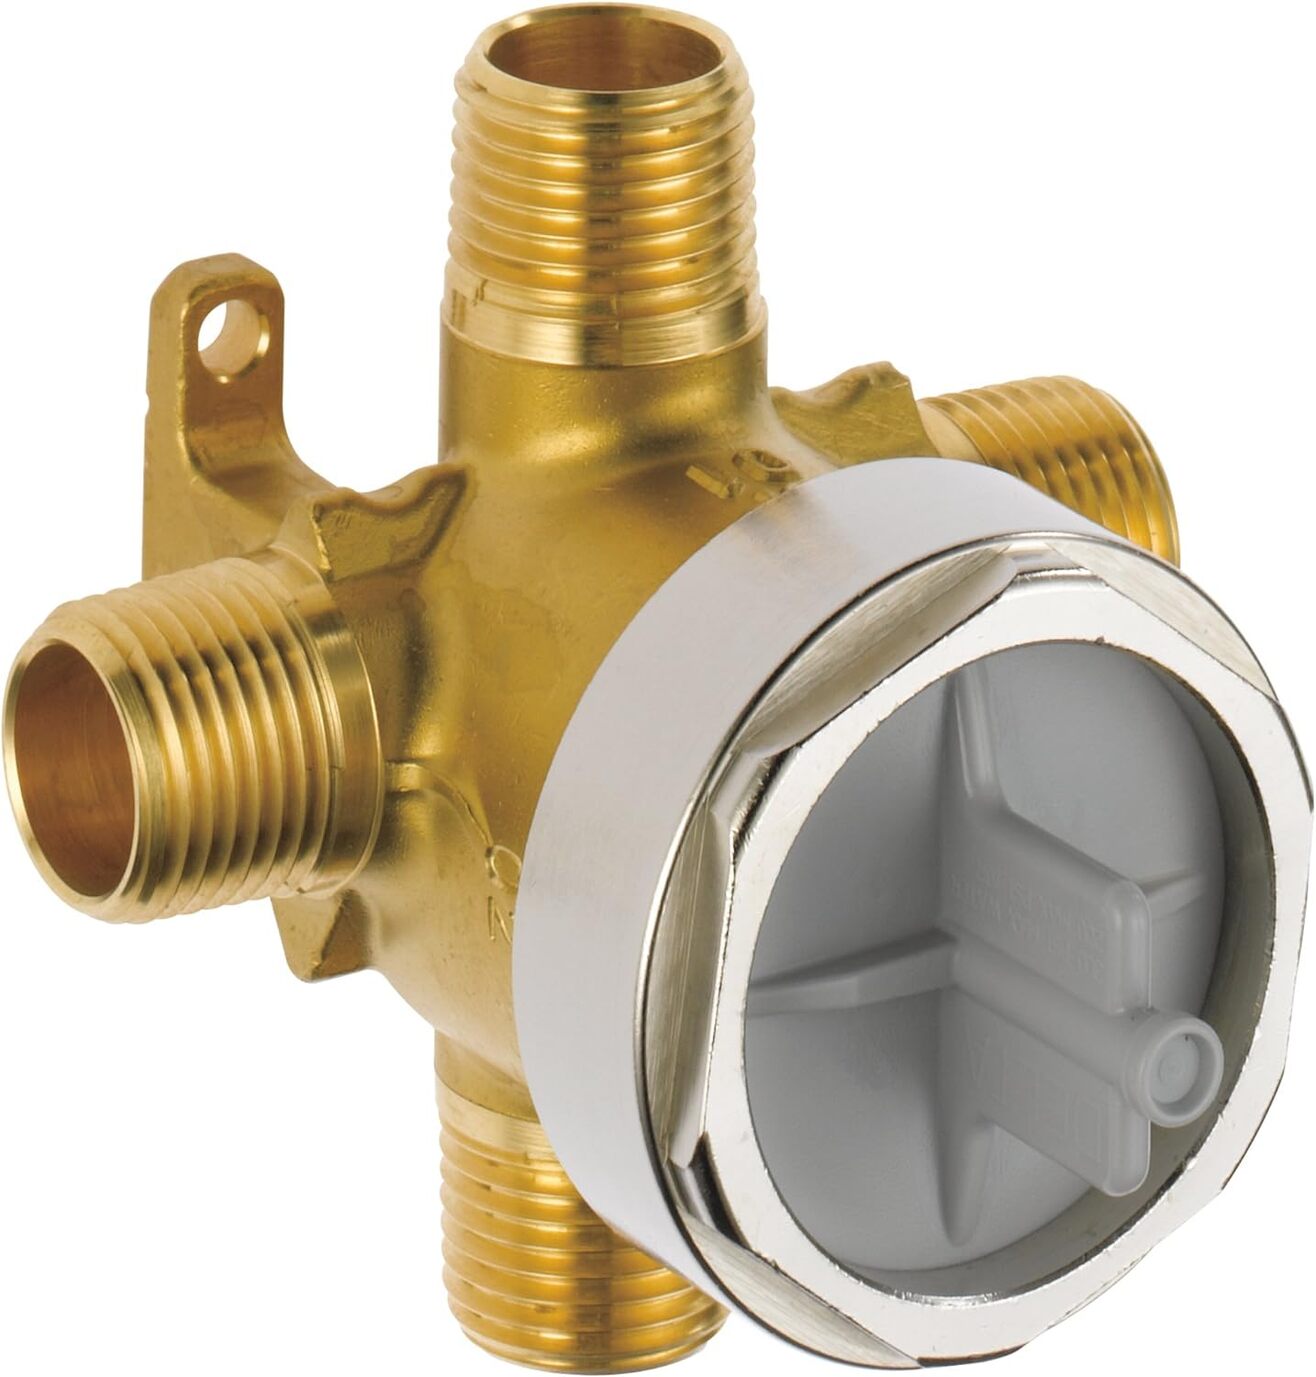 Top-10-Best-Shower-Valve-and-Valuable-Buying-Guide-TN